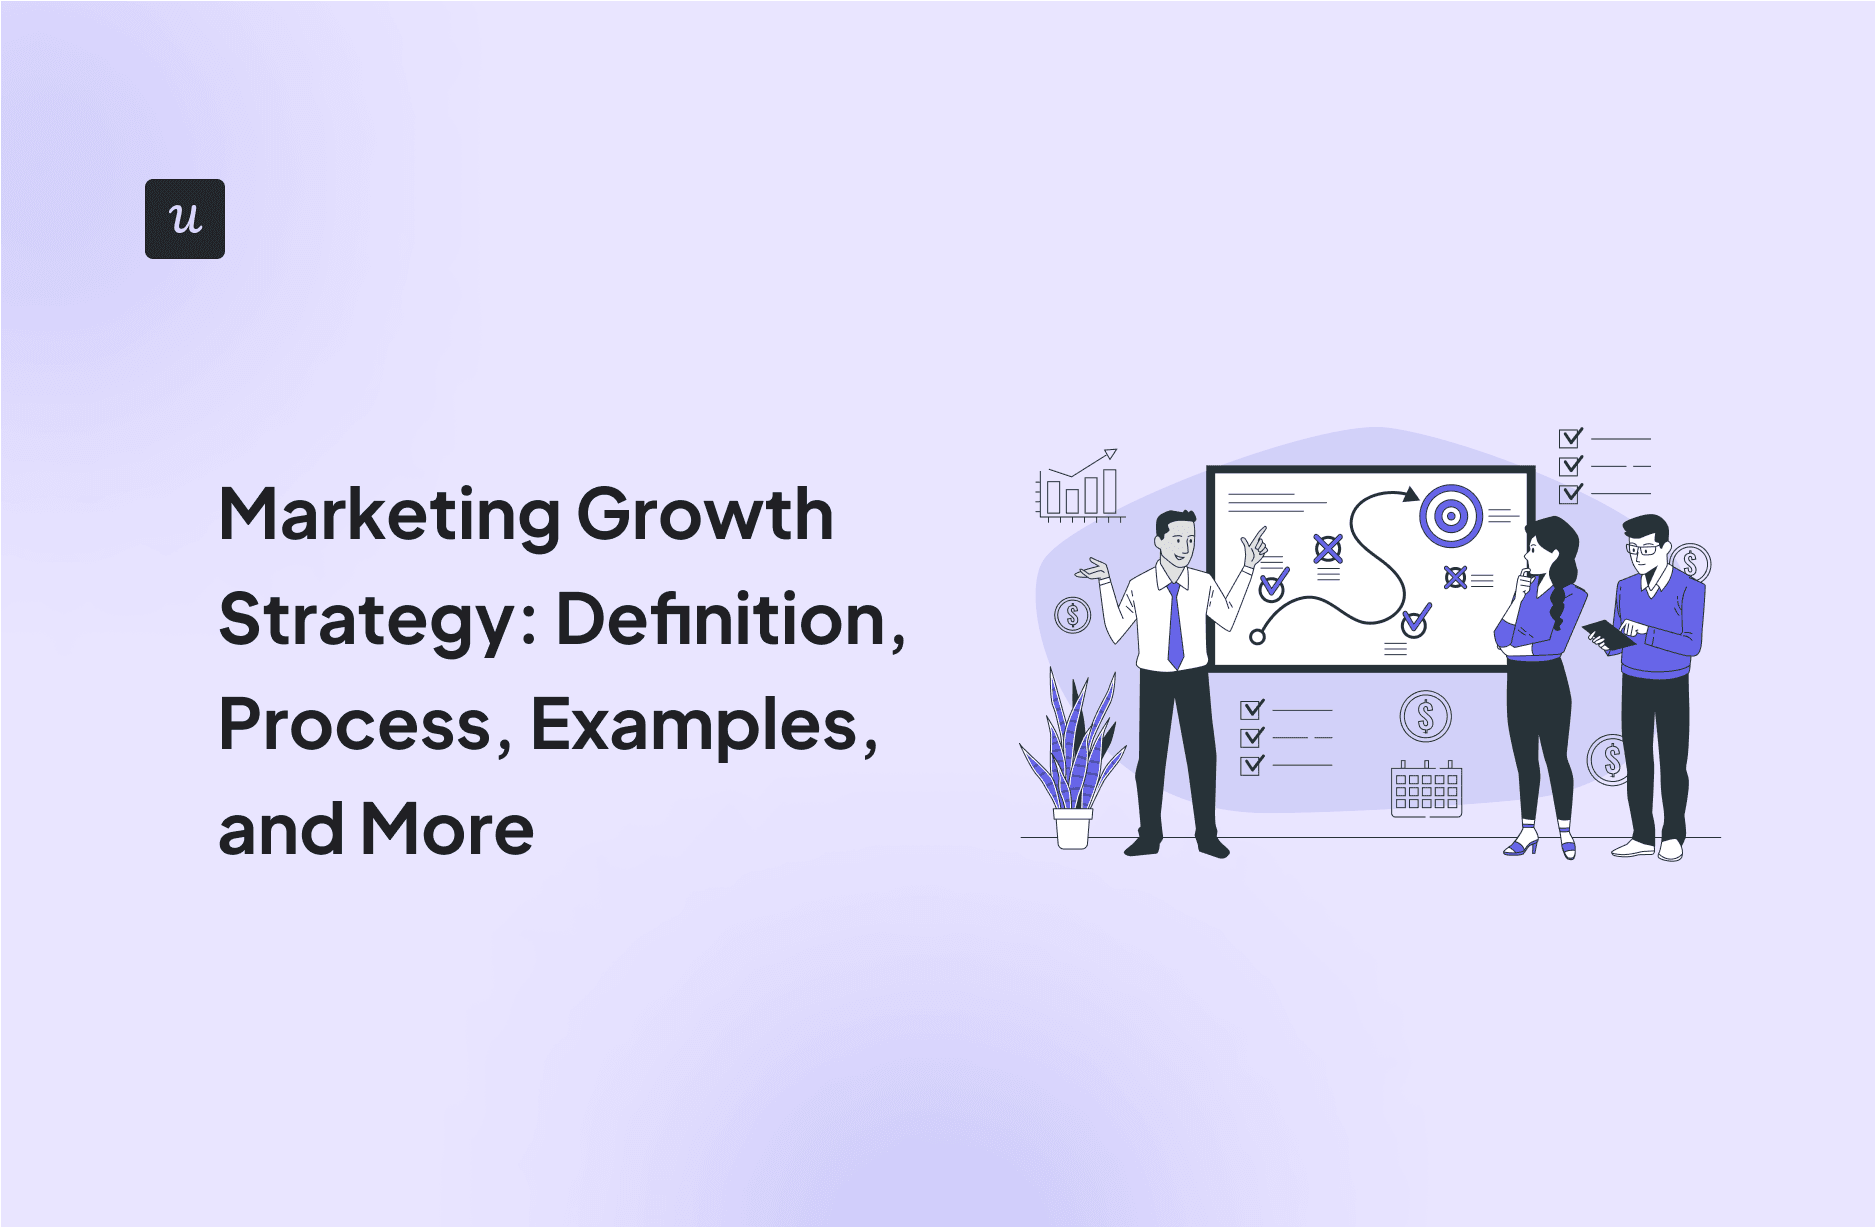 Marketing Growth Strategy: Definition, Process, Examples, and More cover